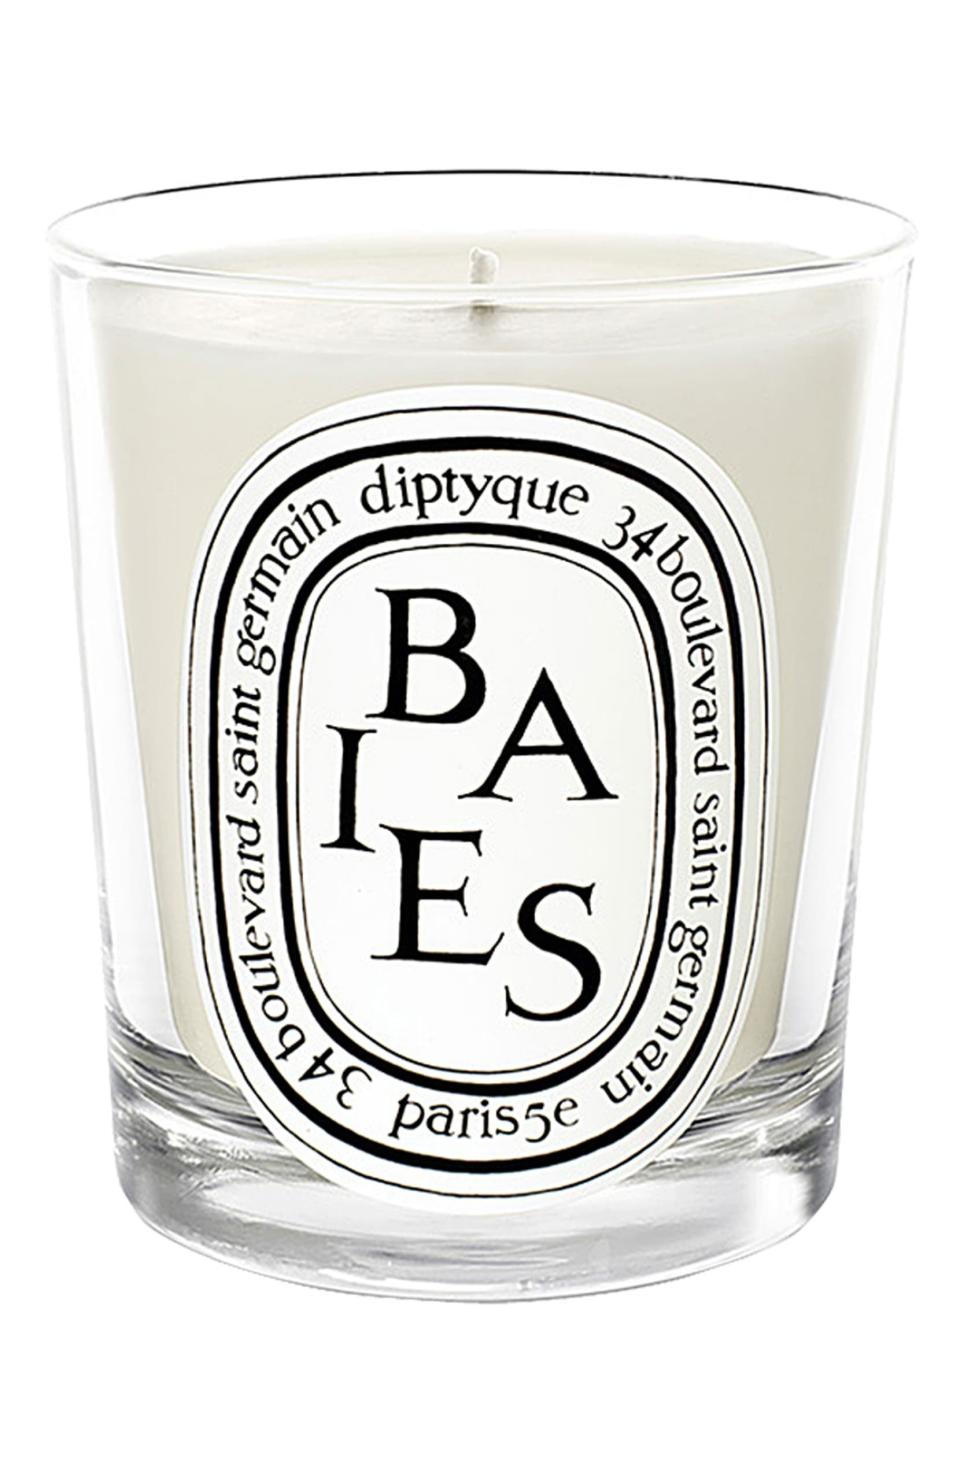 Diptyque Paris Baies/Berries Candle, best gifts for her